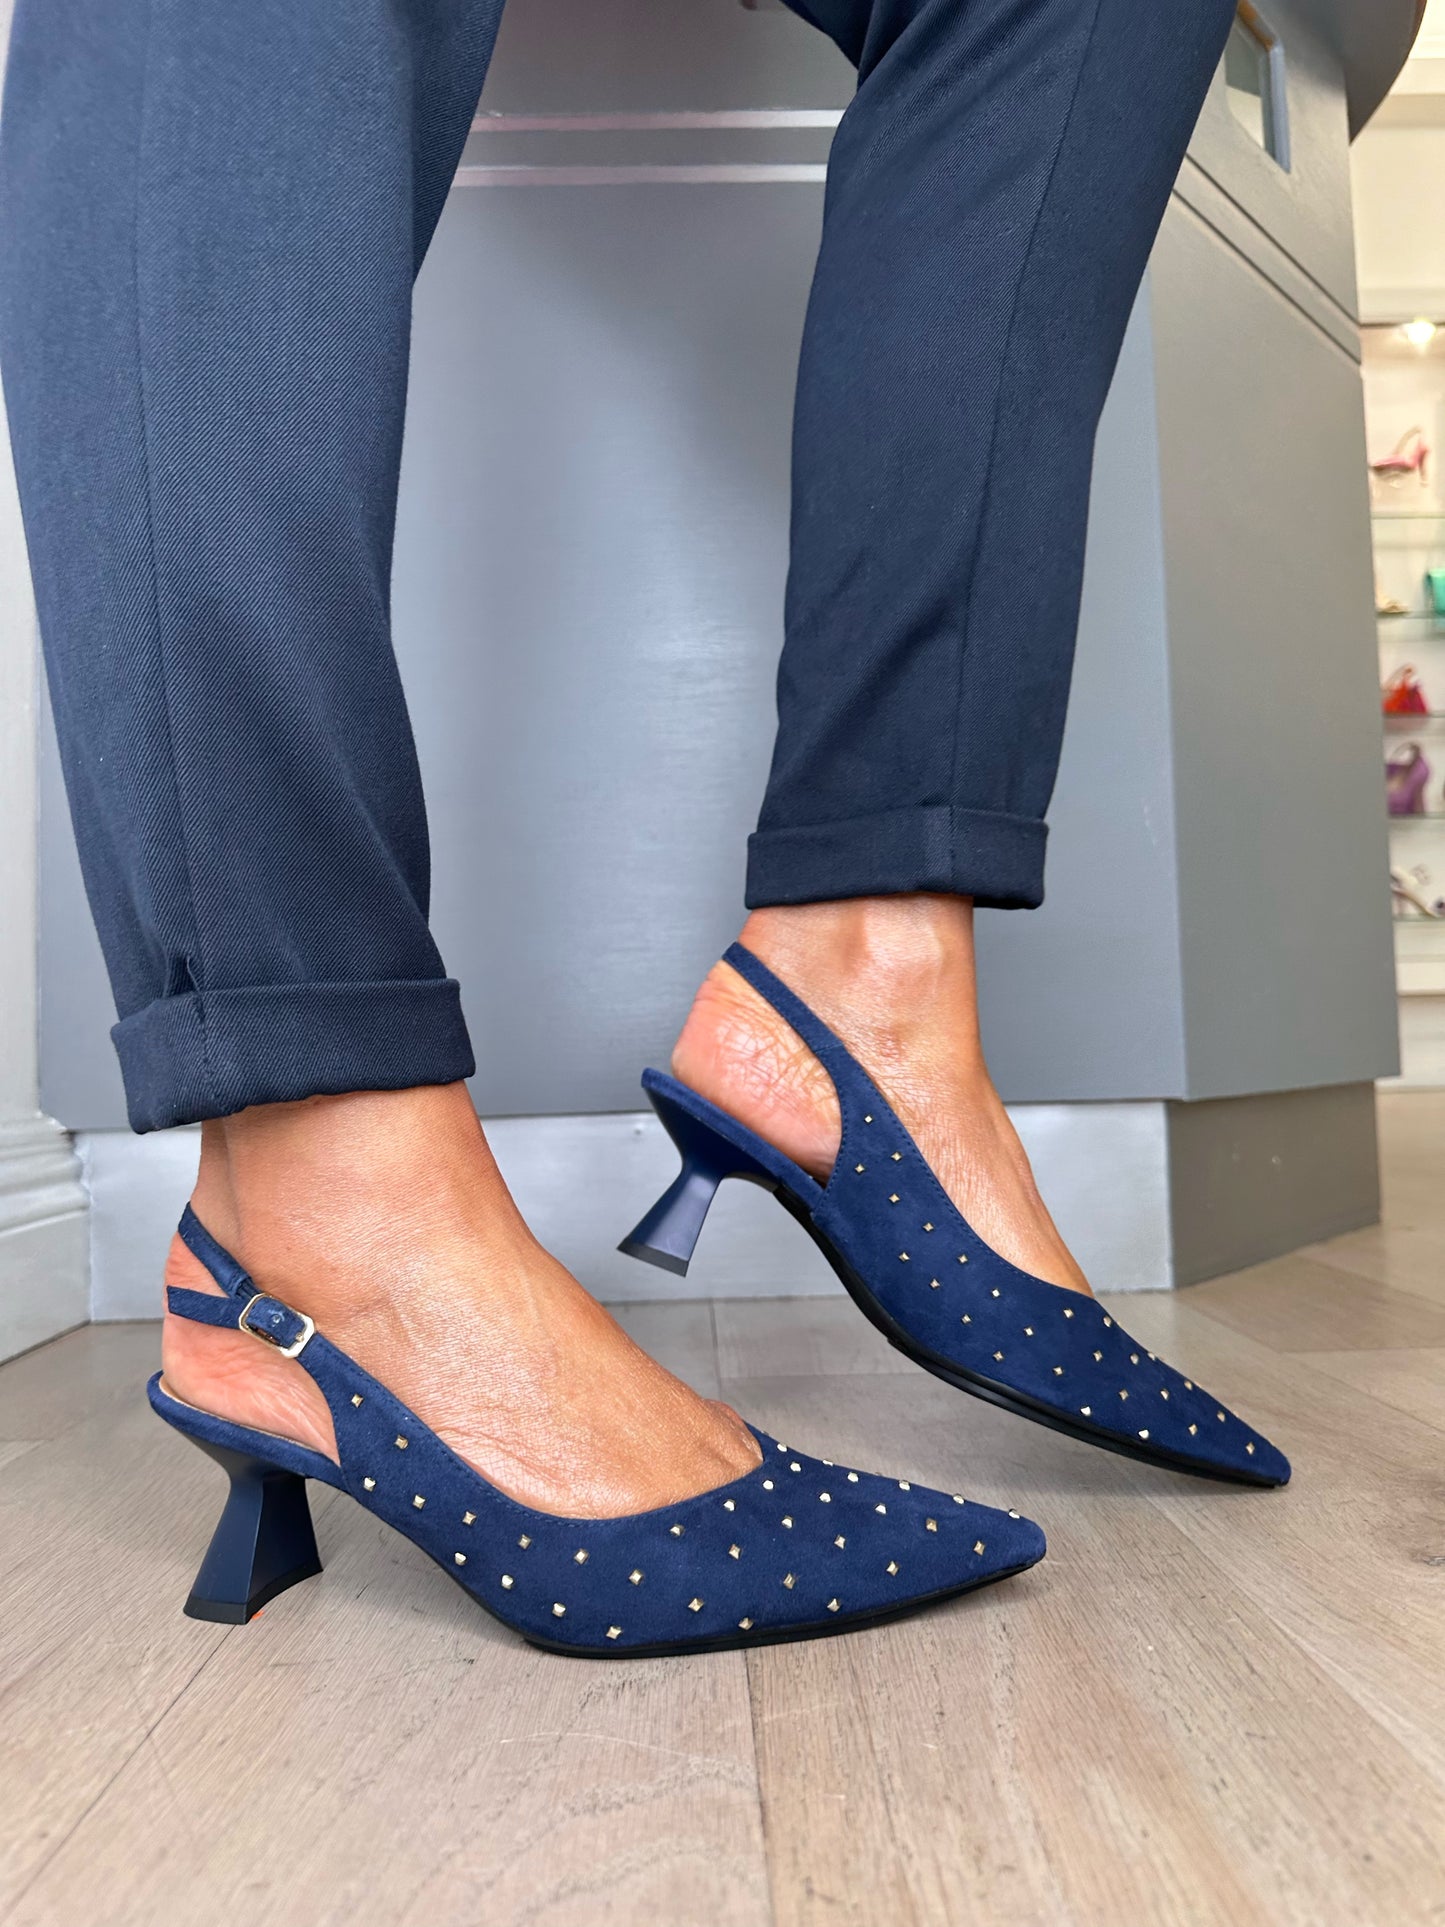 Lodi (Love) - Navy Suede Pointy Toe Sling Back Kitten Heel With Gold Studded Trim